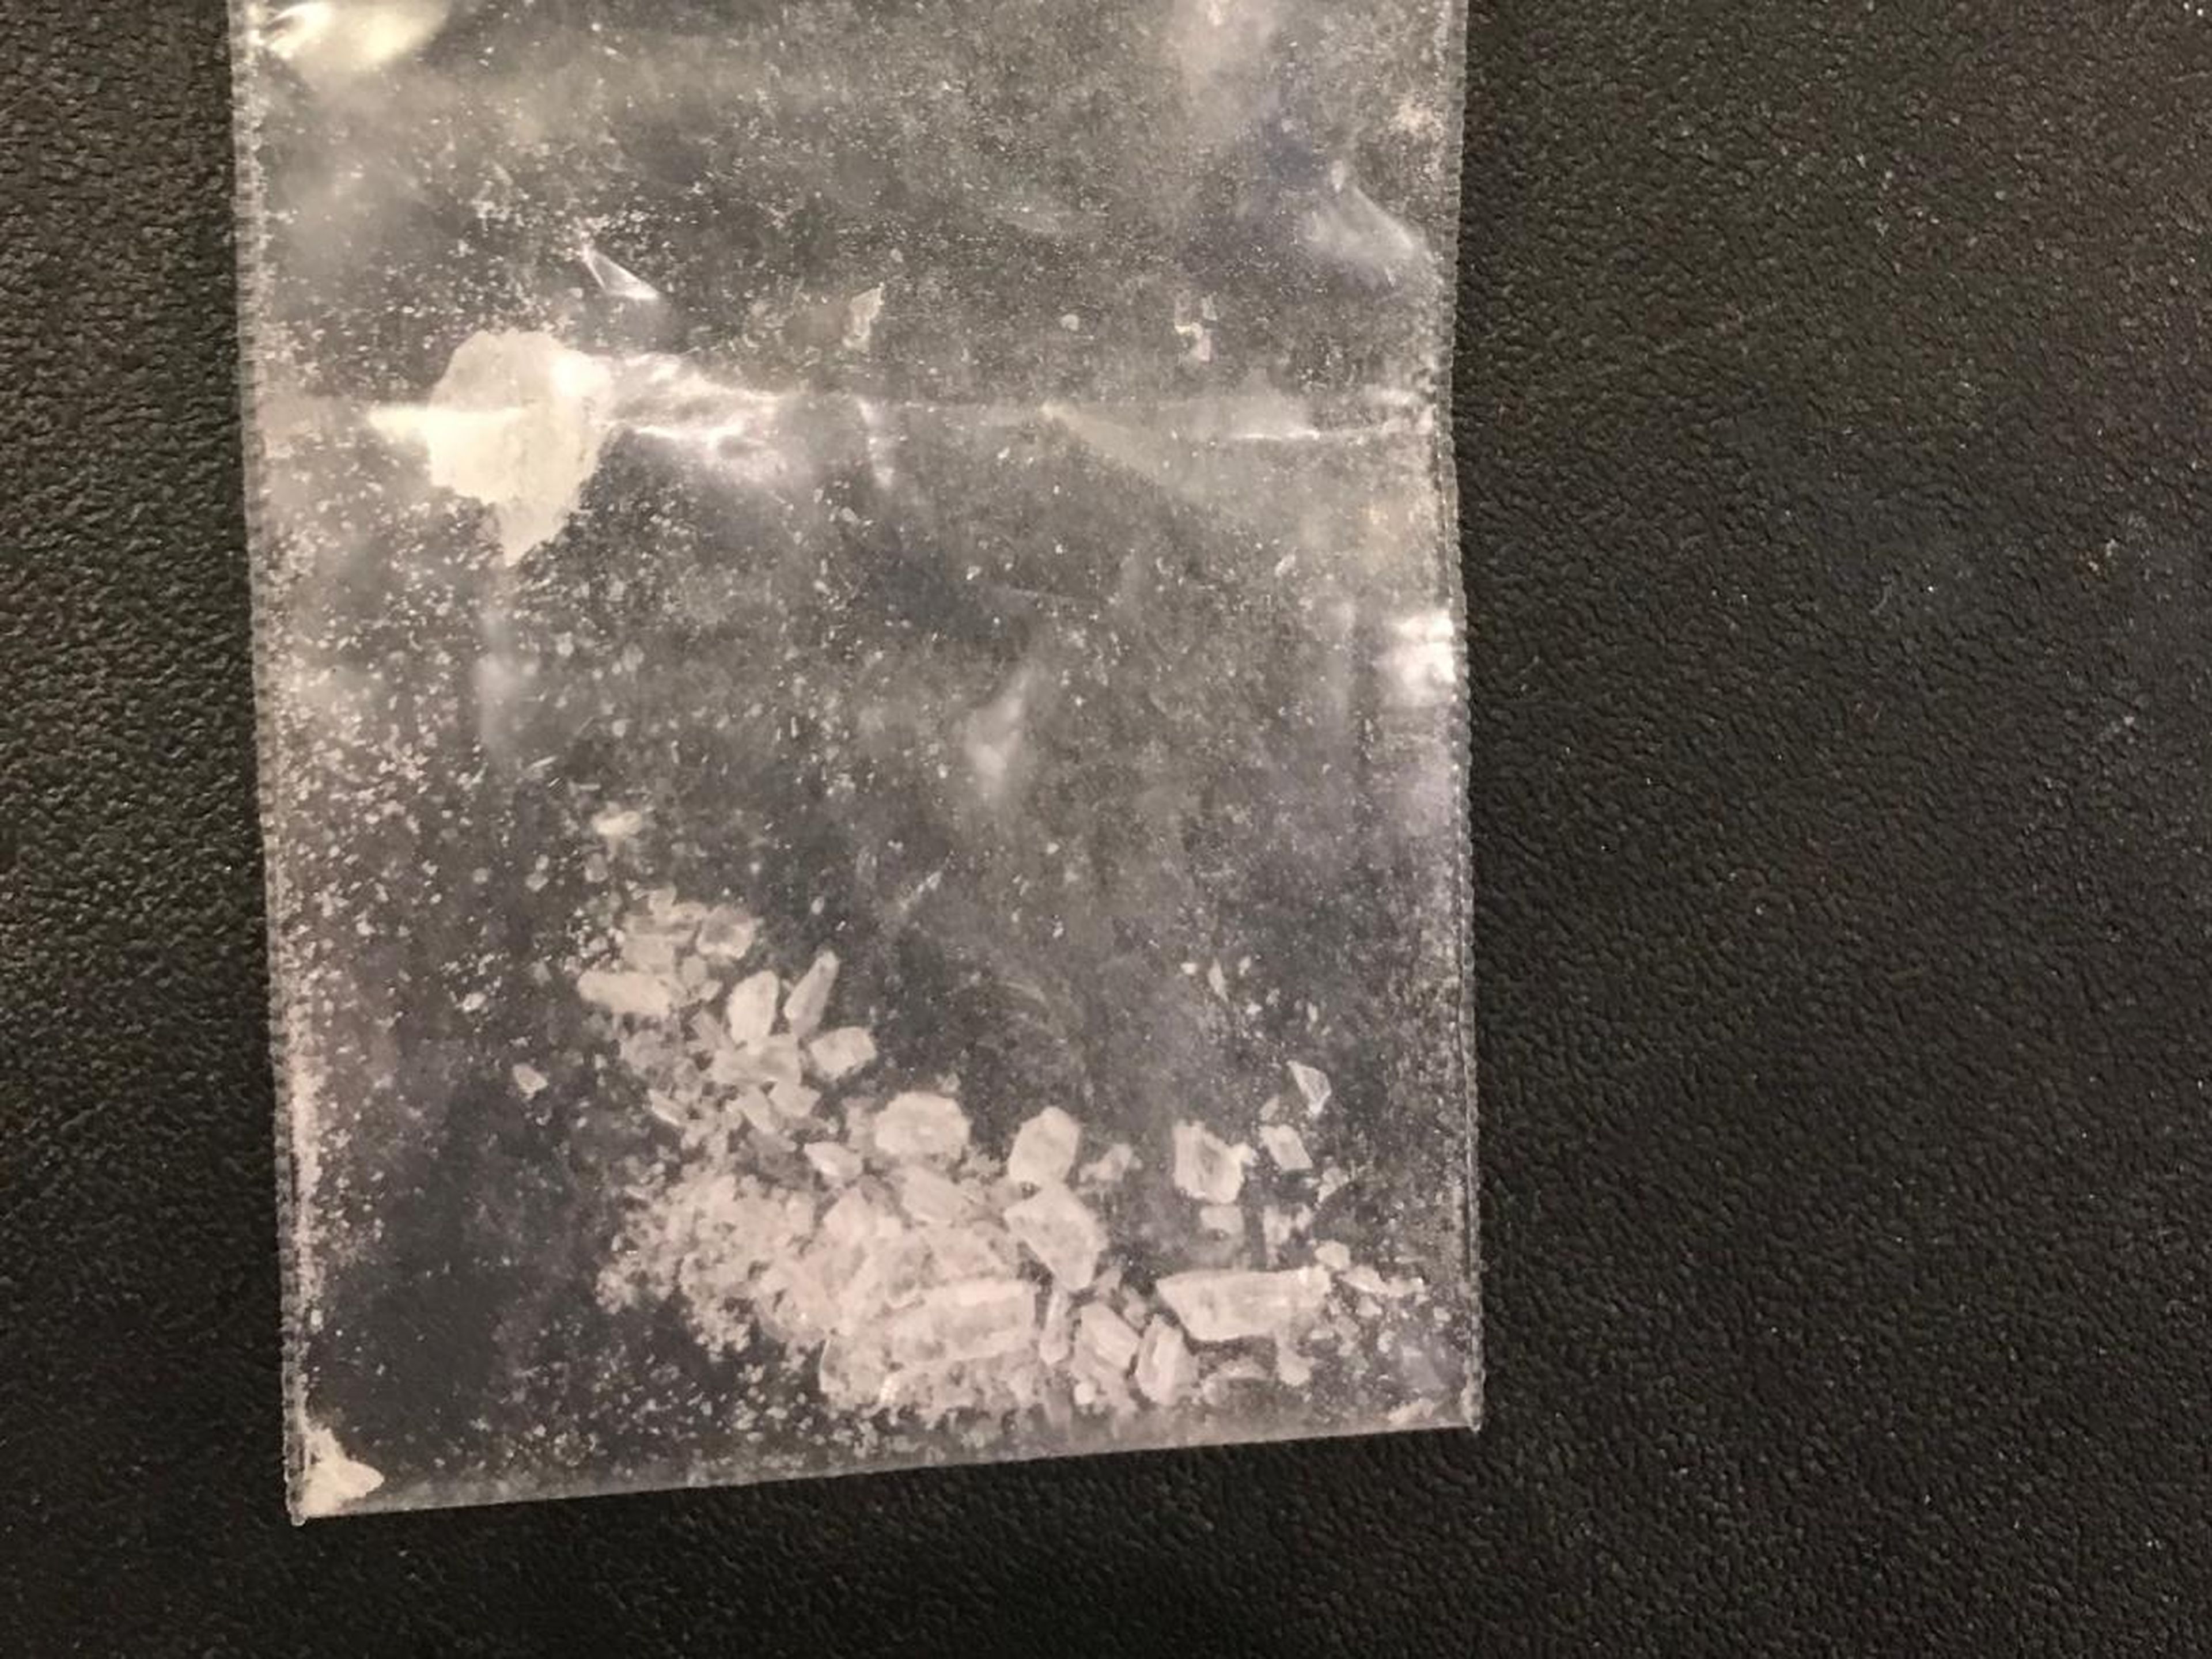 A baggy found in a Starbucks bathroom in December 2018.